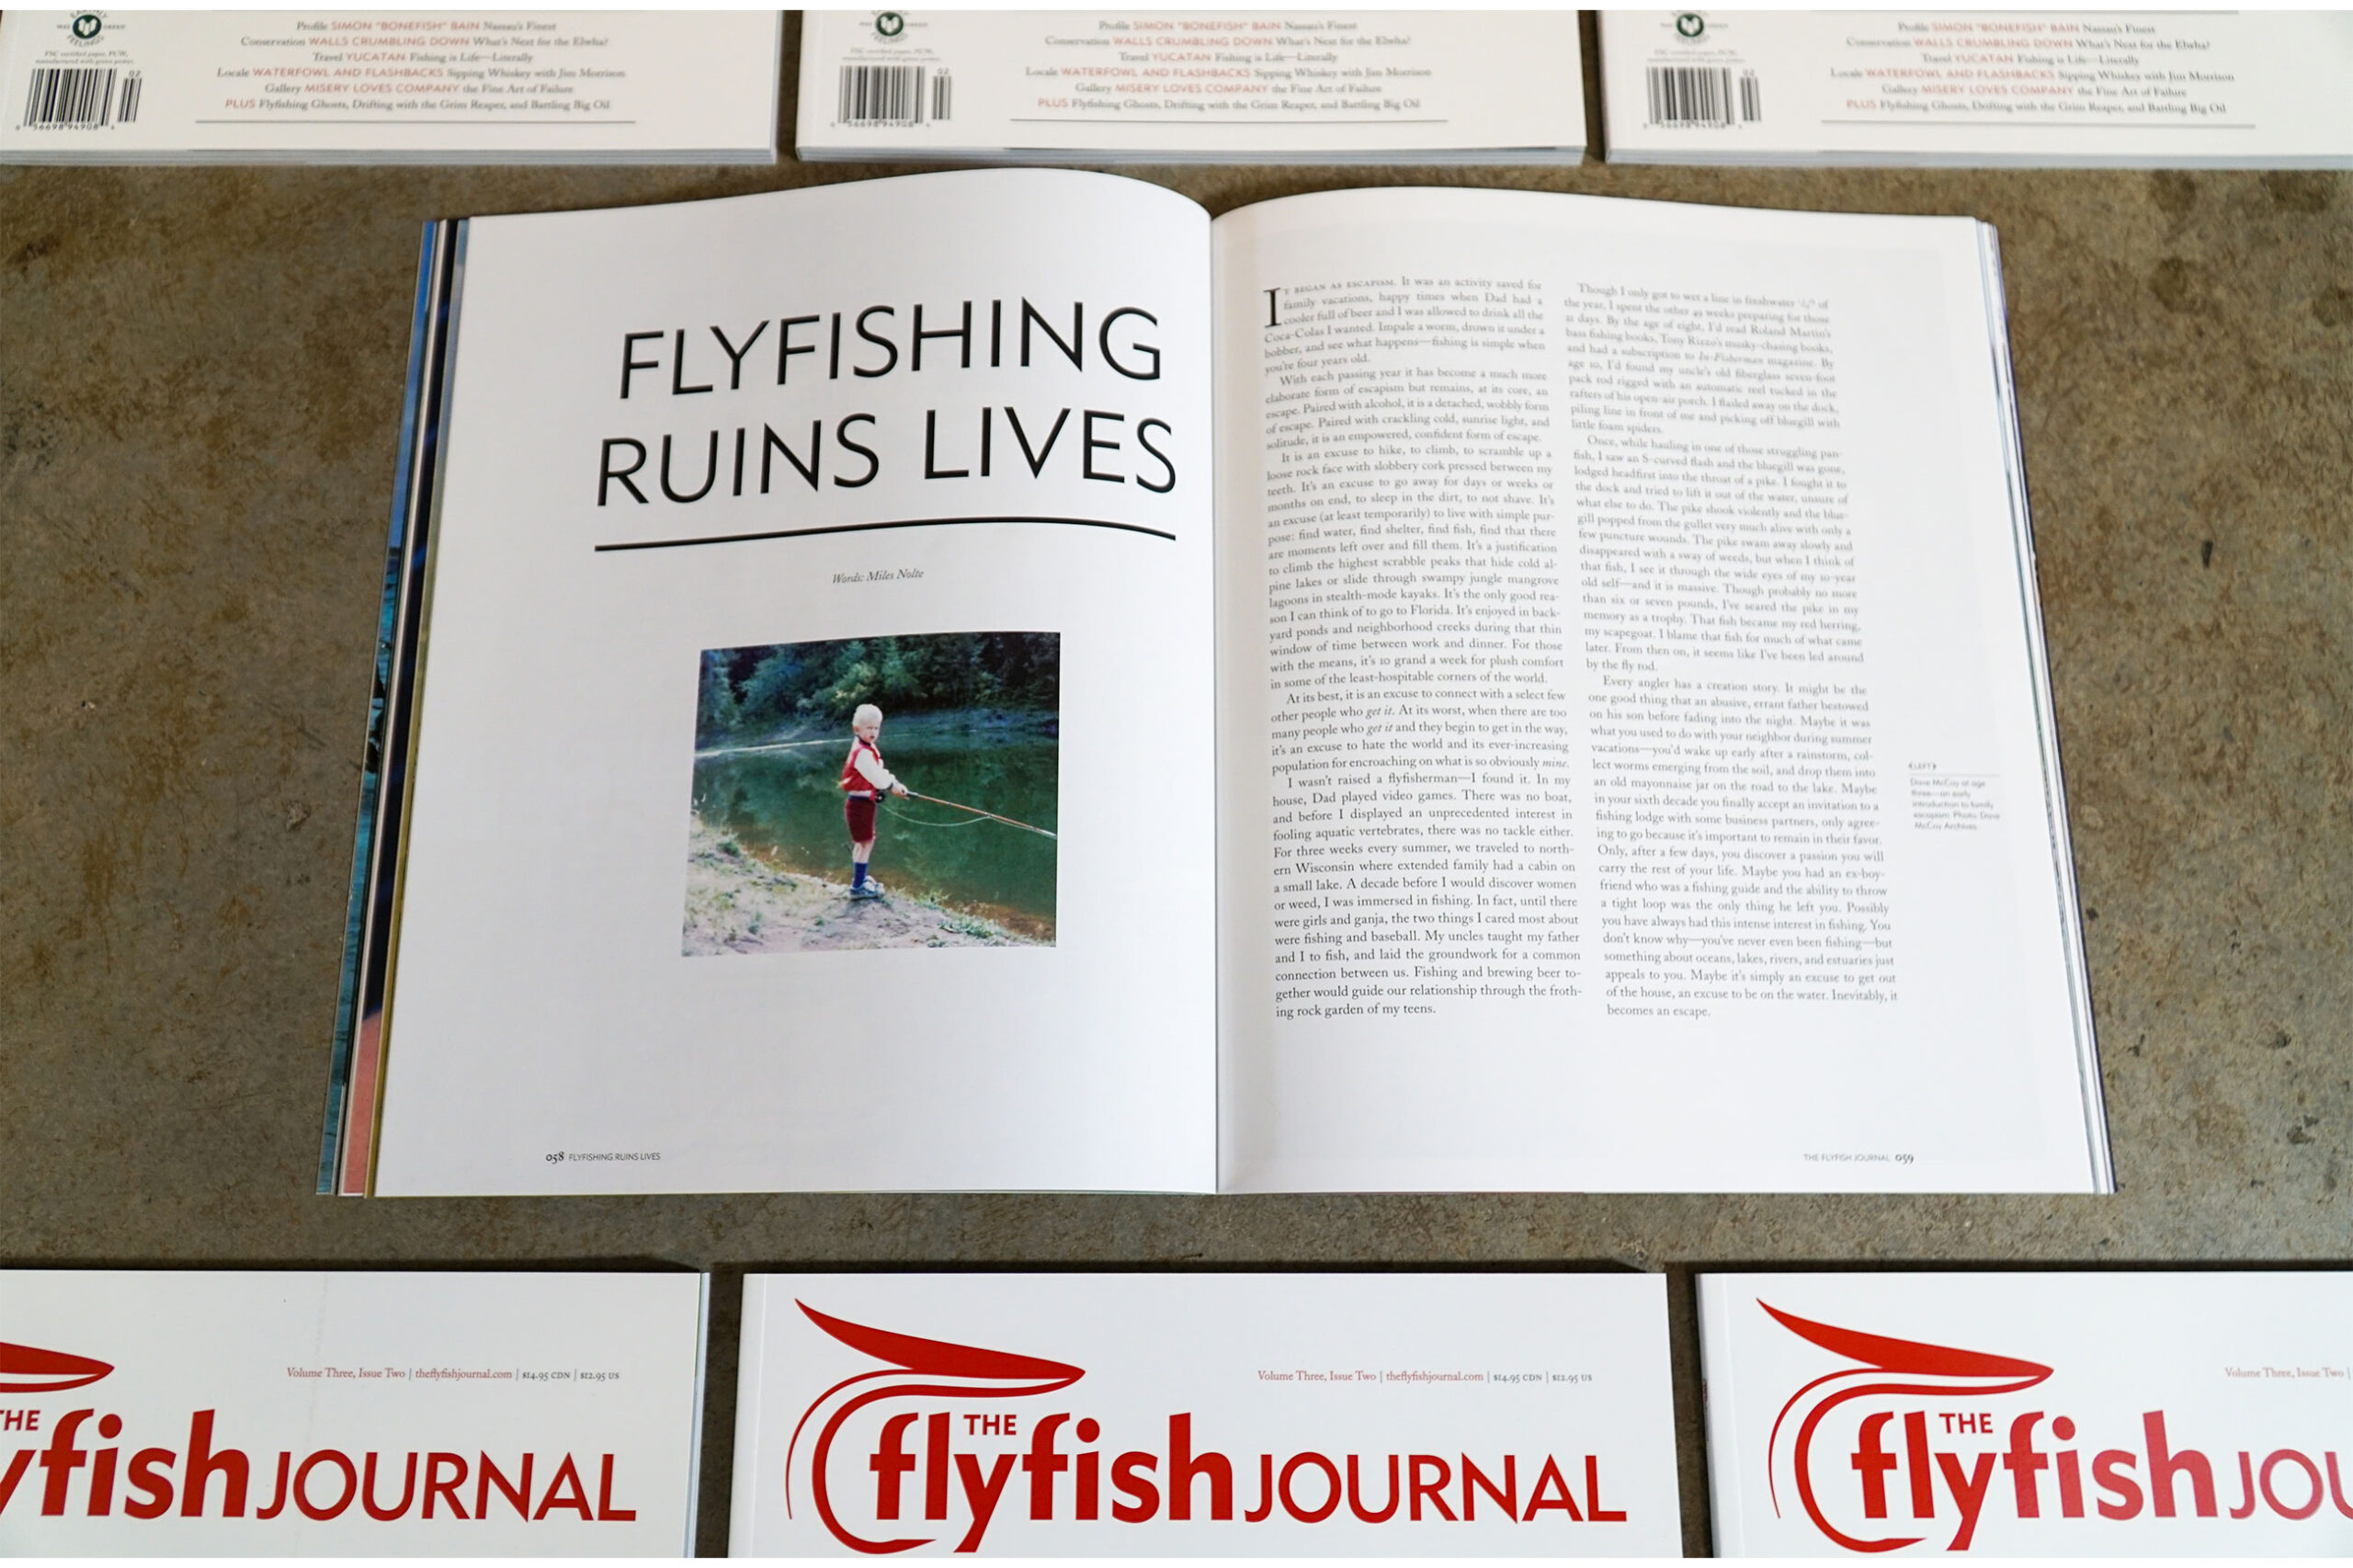 The Flyfish Journal Volume 3 Issue 2 Feature Flyfish Ruins Lives